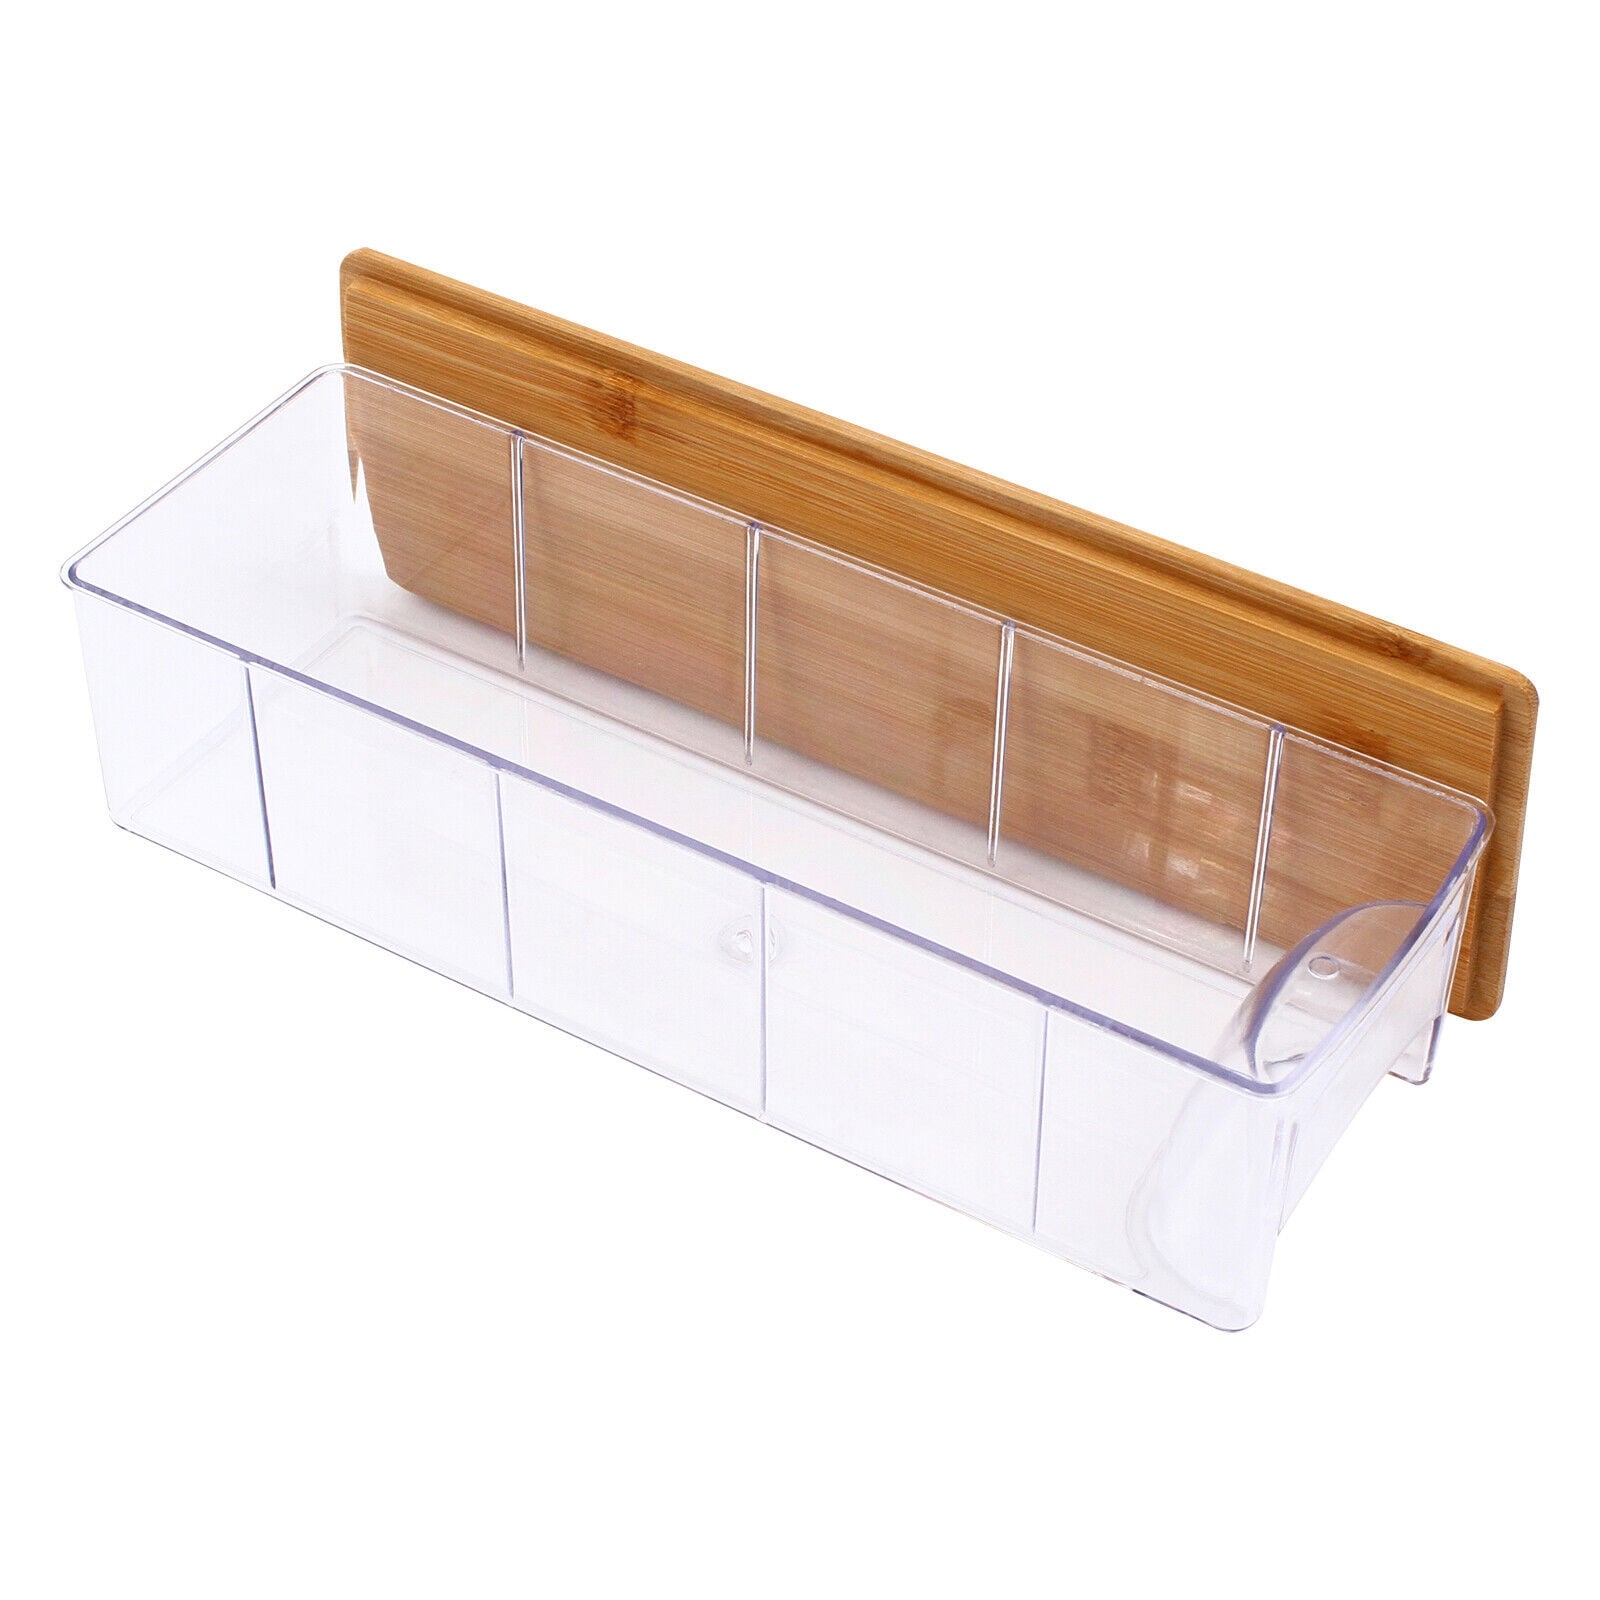 https://ak1.ostkcdn.com/images/products/is/images/direct/2603ad25dbf066fe7caef79d4a2119cd24da3791/Organic-Bamboo-Cutting-Board-with-4-Containers.jpg